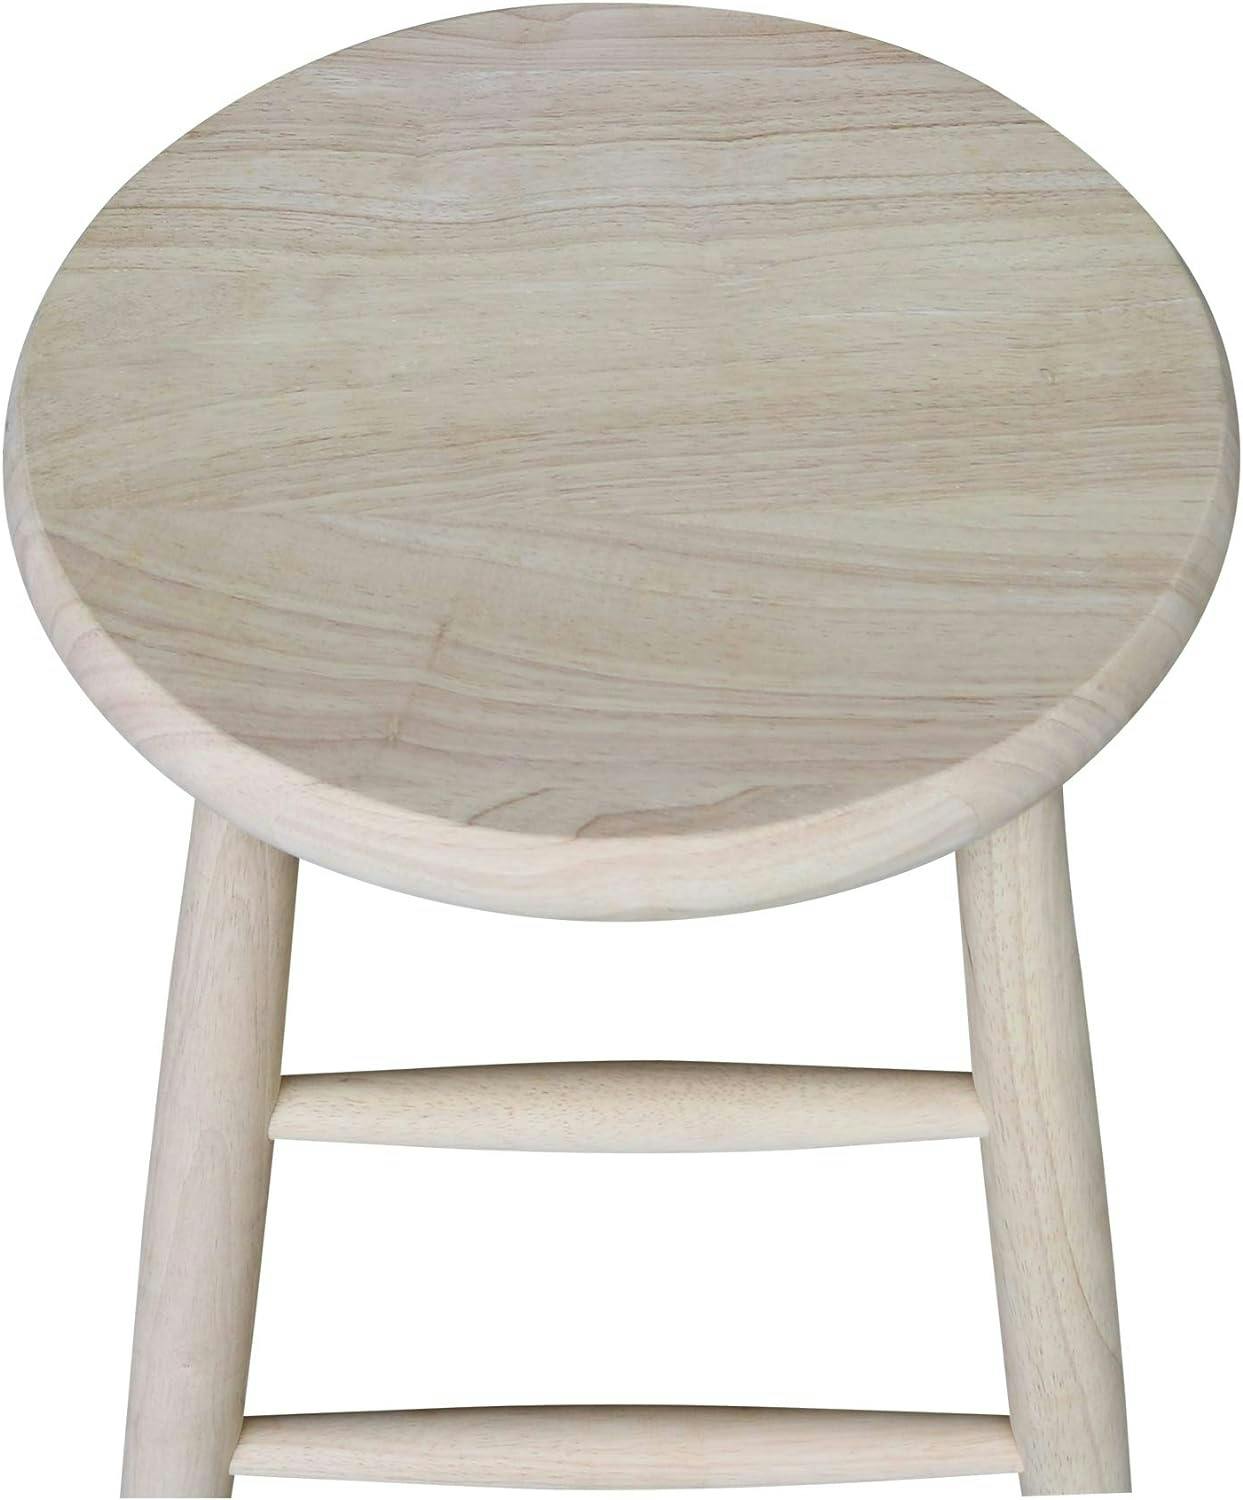 Traditional Solid Hardwood Unfinished Counter Height Stool